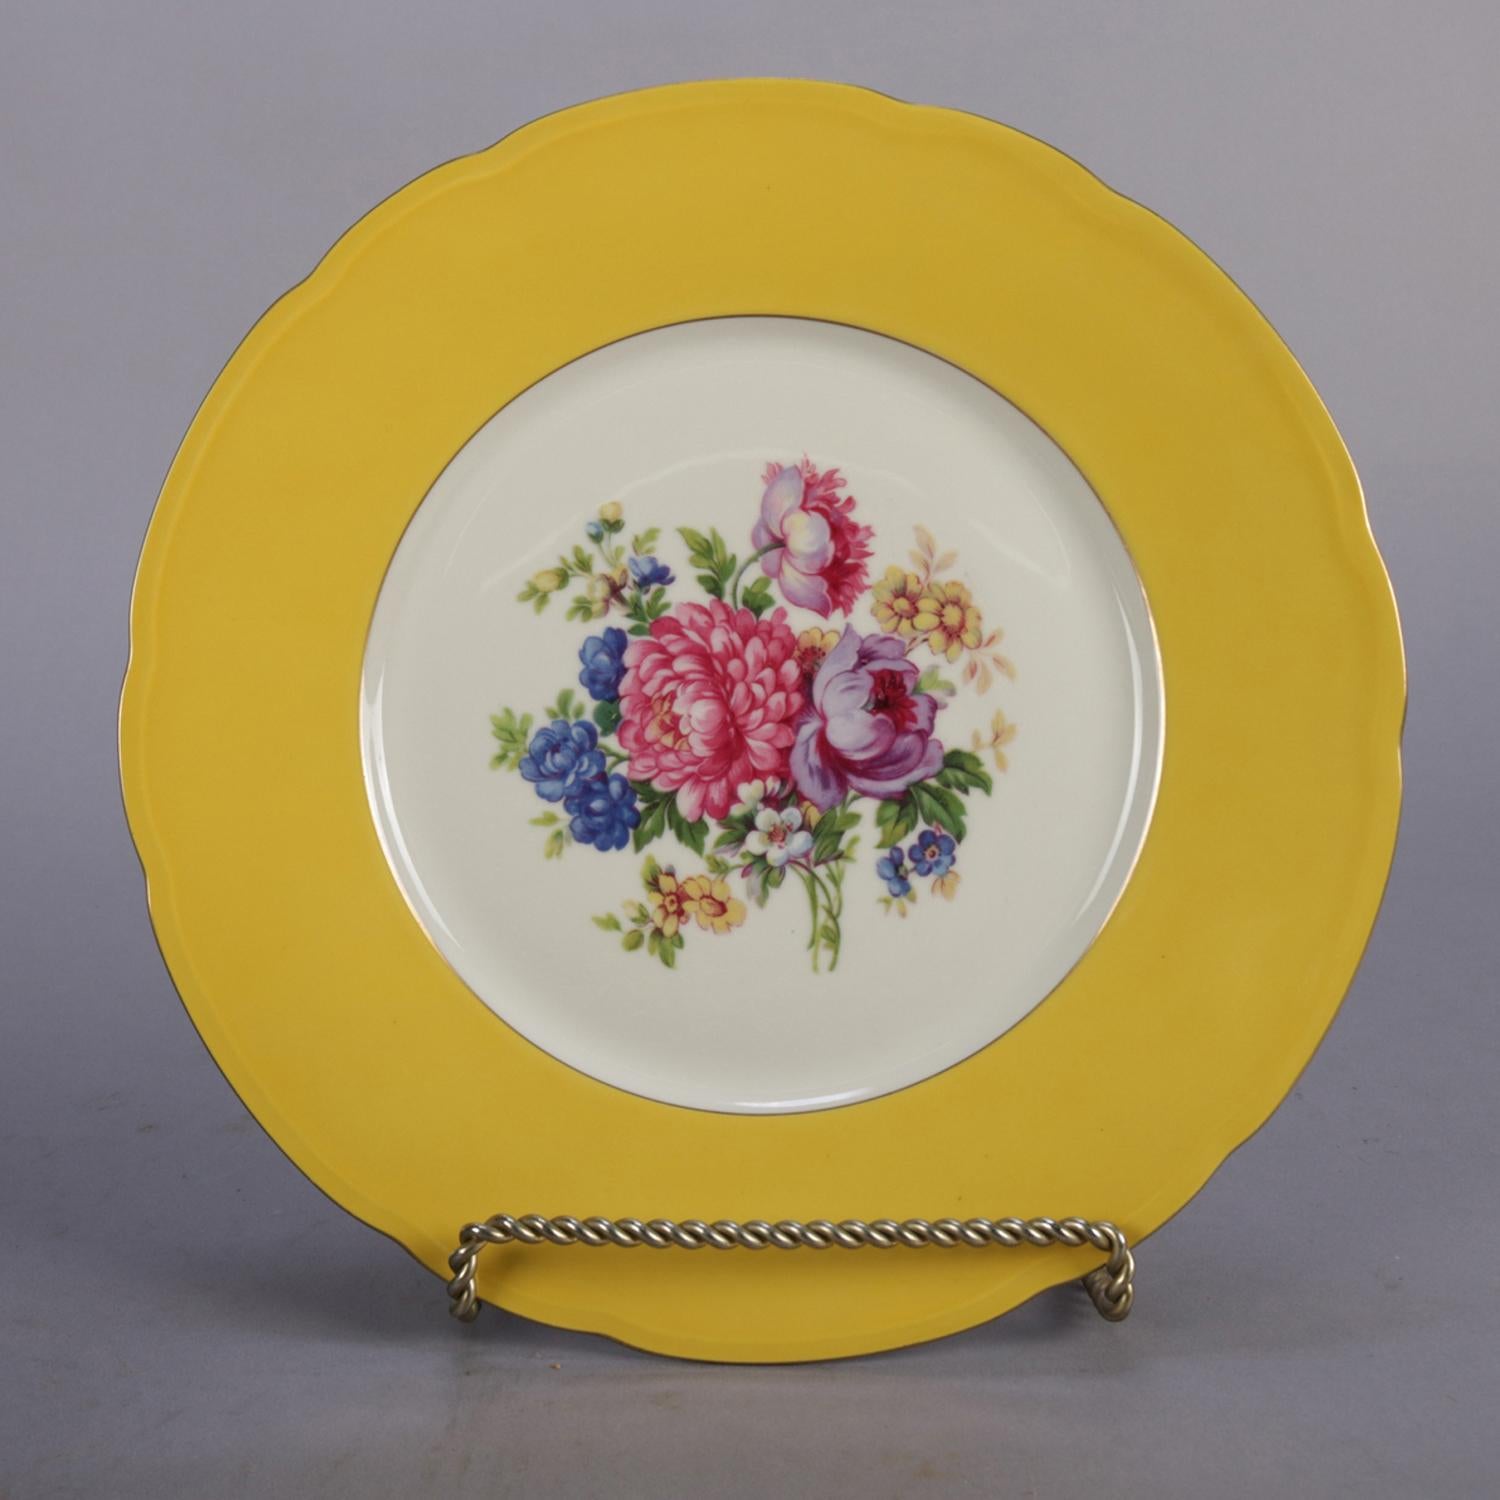 Set of 12 vintage Czech porcelain dinner plates feature slight scalloped and gold rims with gilt trimming and central floral bouquet, en verso maker mark 